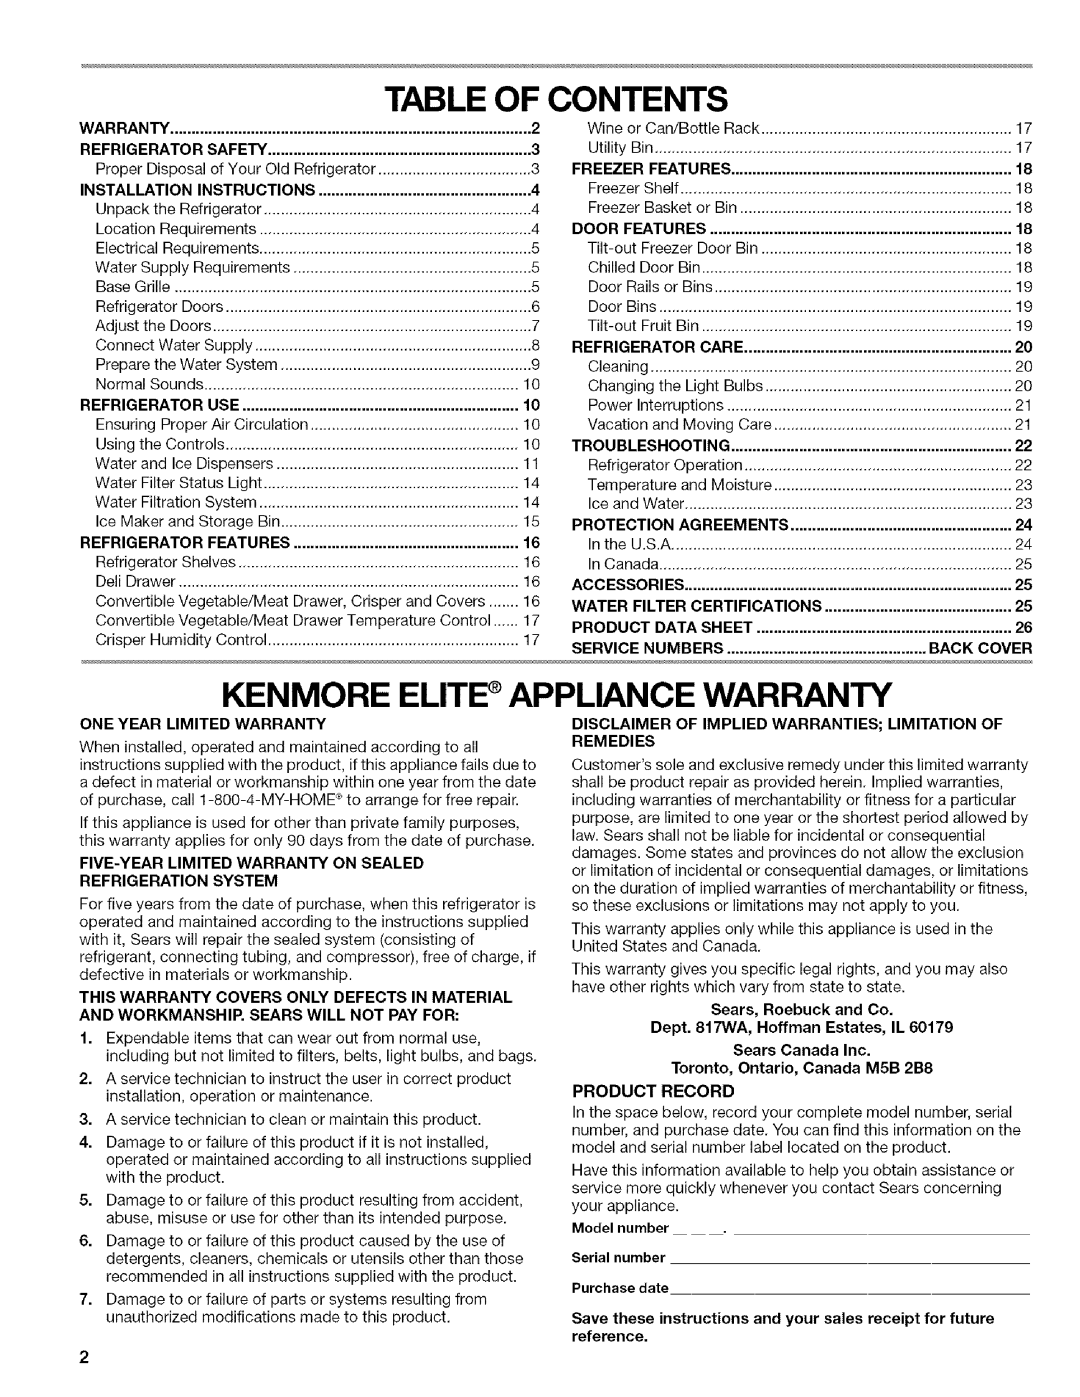 Kenmore 2318589 Table Of Contents, Kenmore Elite Appliance Warranty, Refrigerator, Freezer, Features, Product, Numbers 